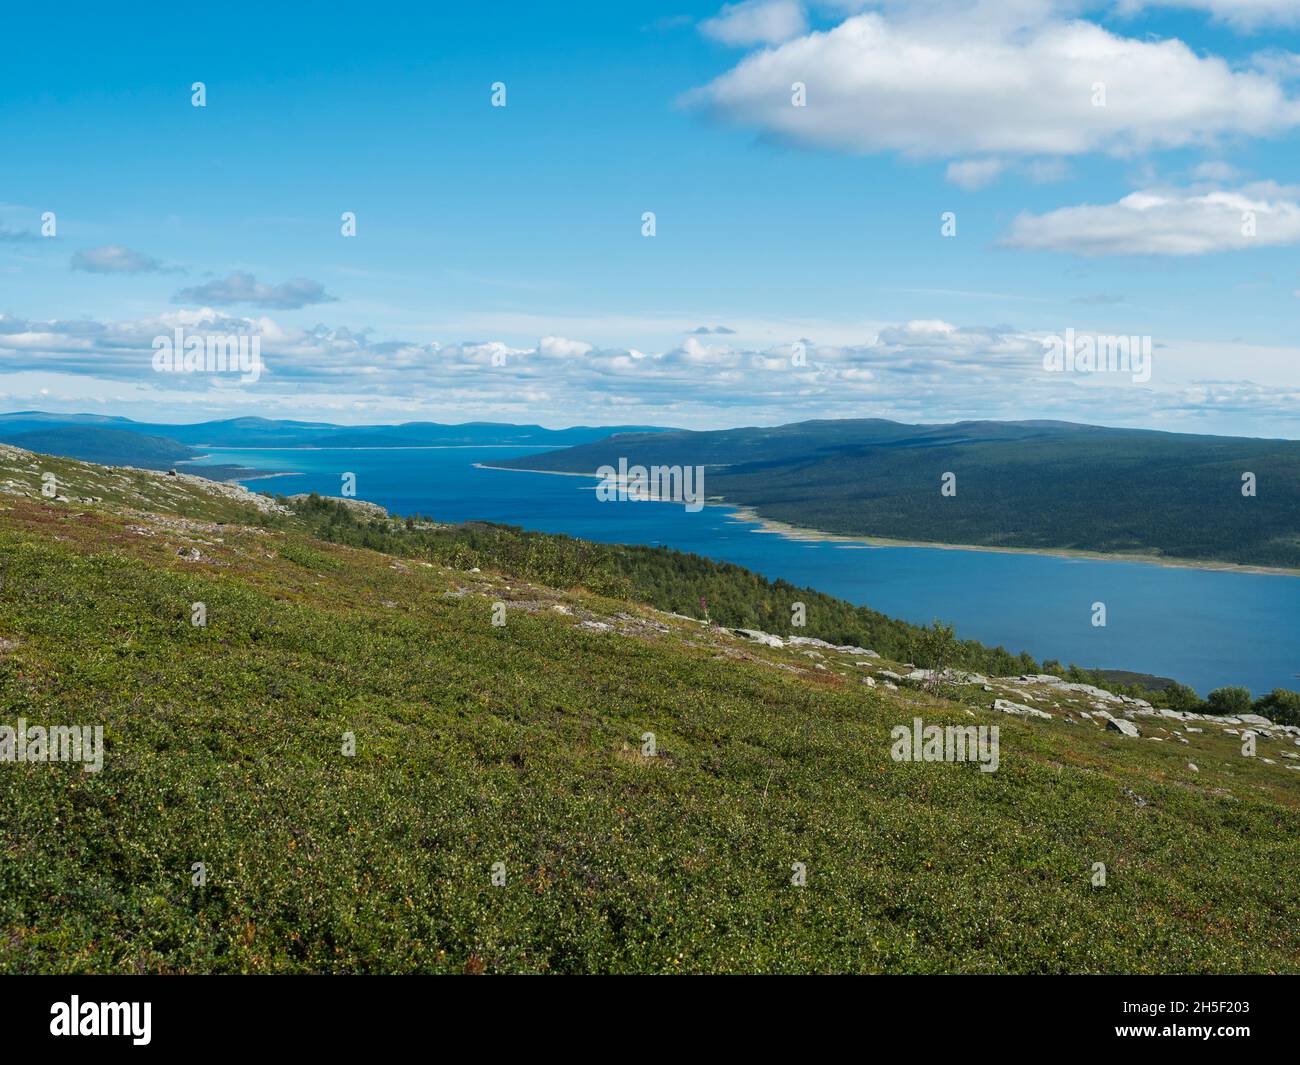 View on Tjaktjajaure lake, valley from Kungsleden hiking trail in Sarek national park, Sweden Lapland. Nordic wild landscape with mountains, hill Stock Photo